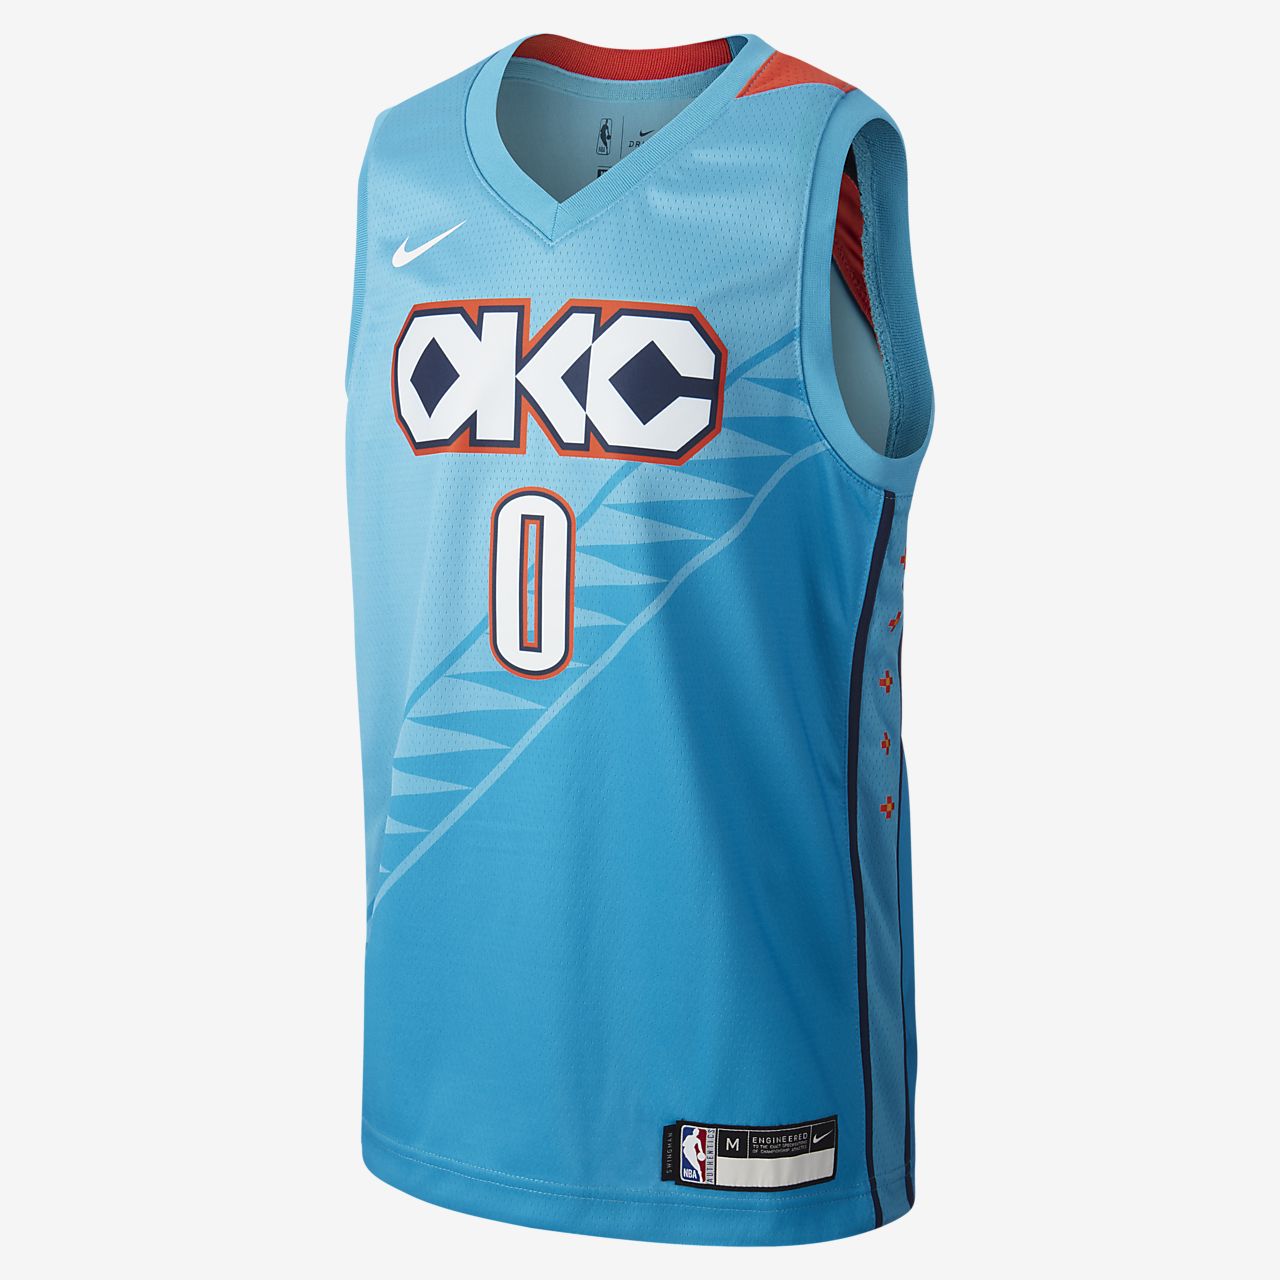 russell westbrook jersey and shorts